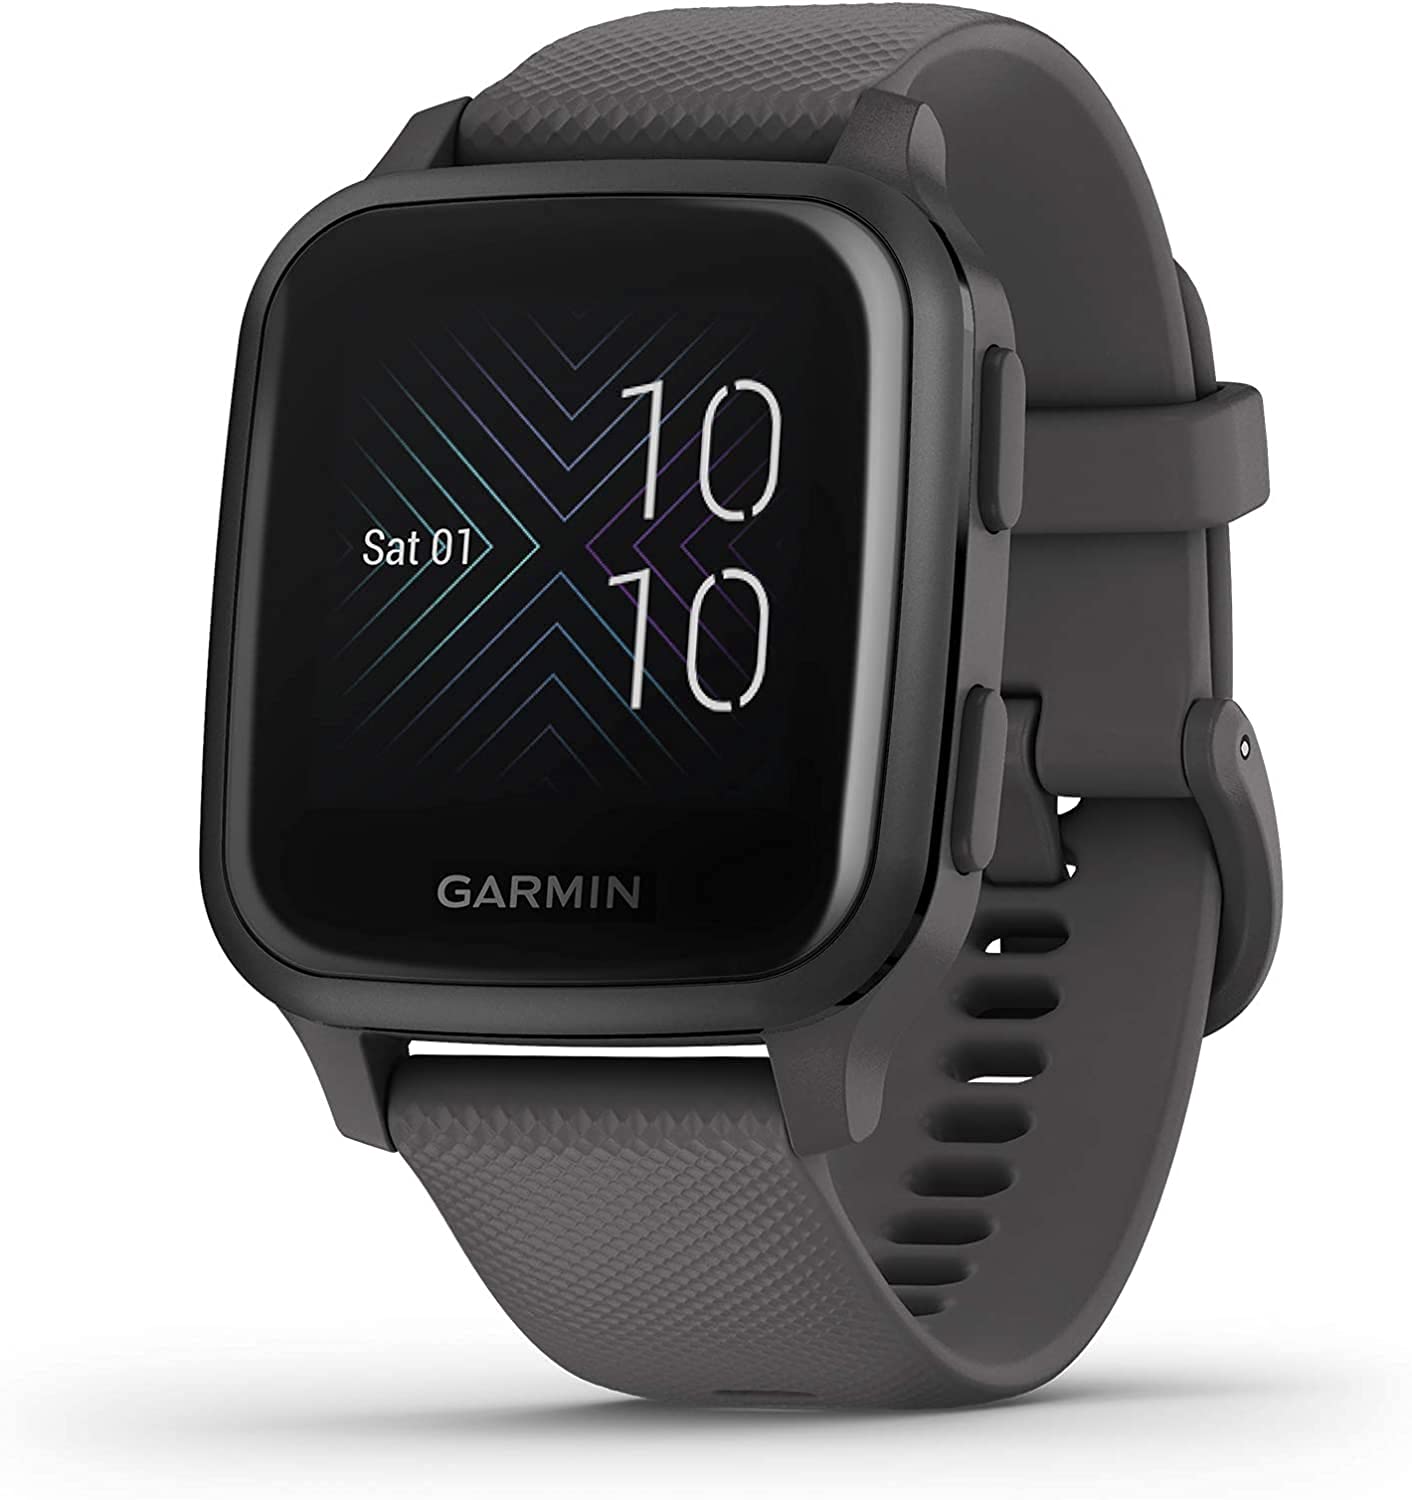 one of the most affordable Smartwatches from Garmin